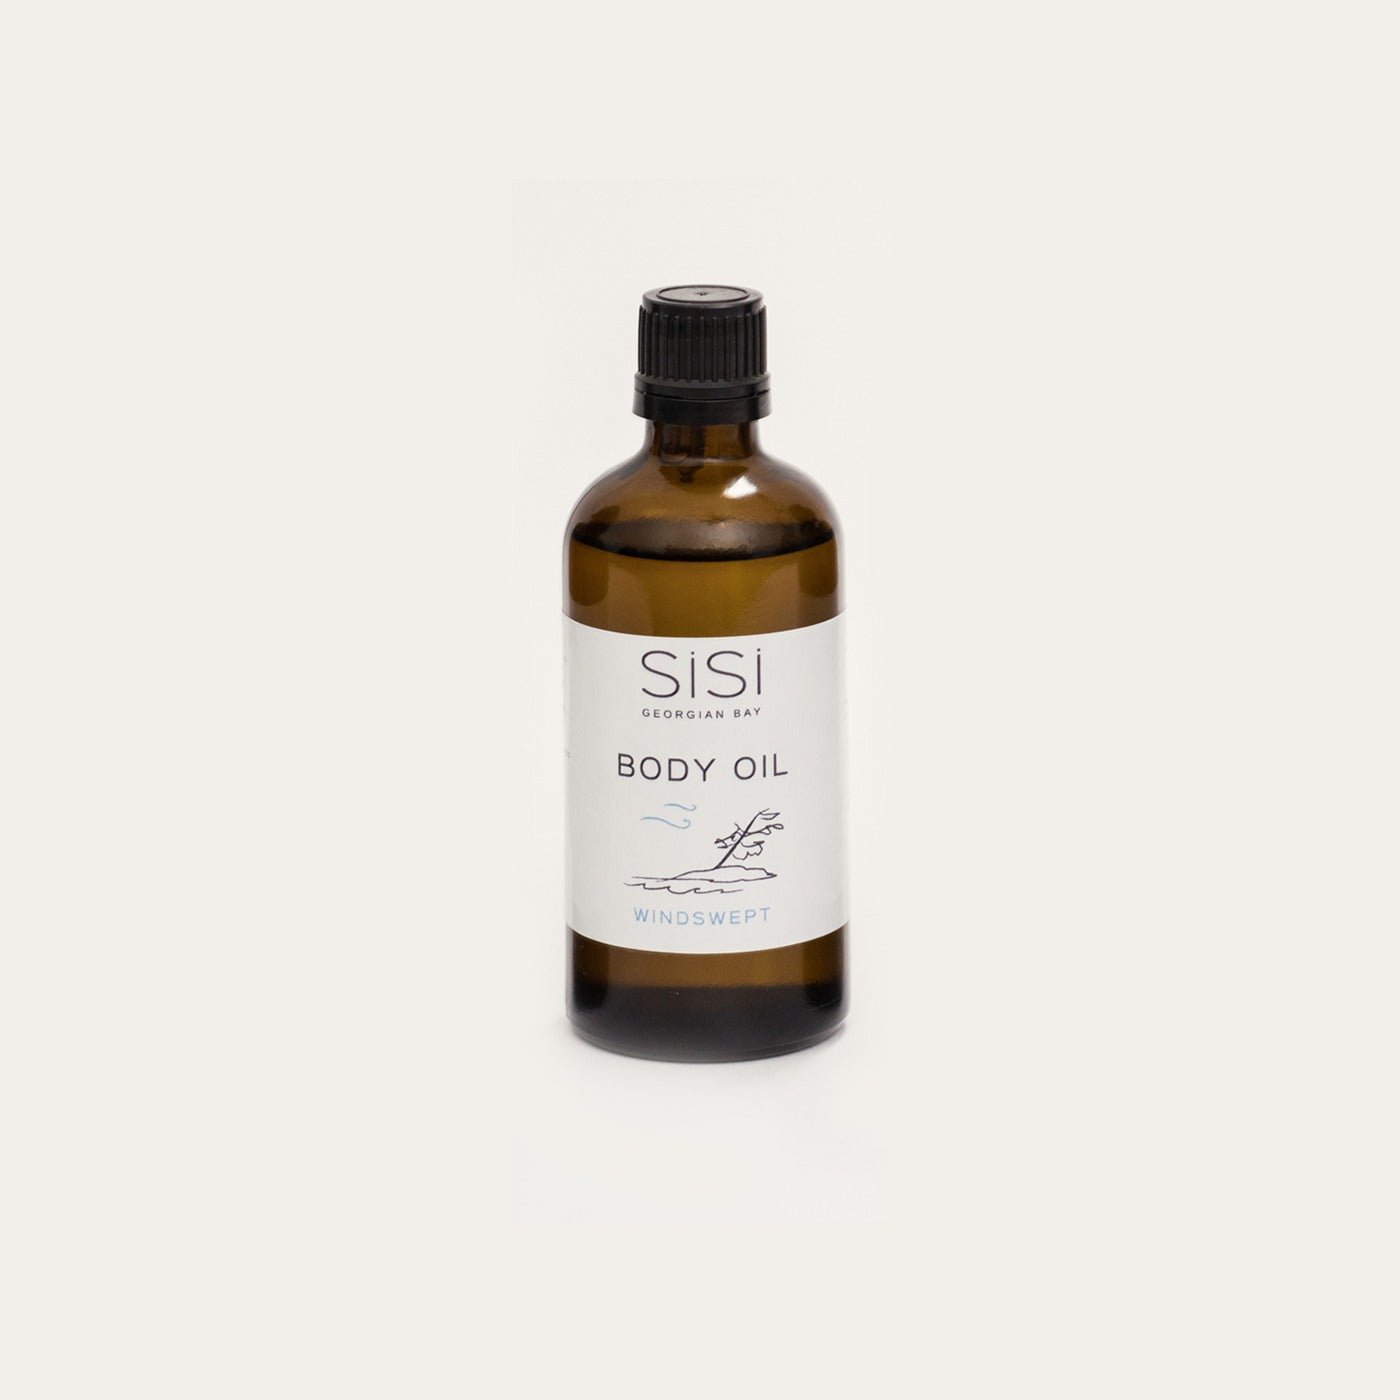 Windswept body oil in a 4oz amber glass bottle on a creamy white background